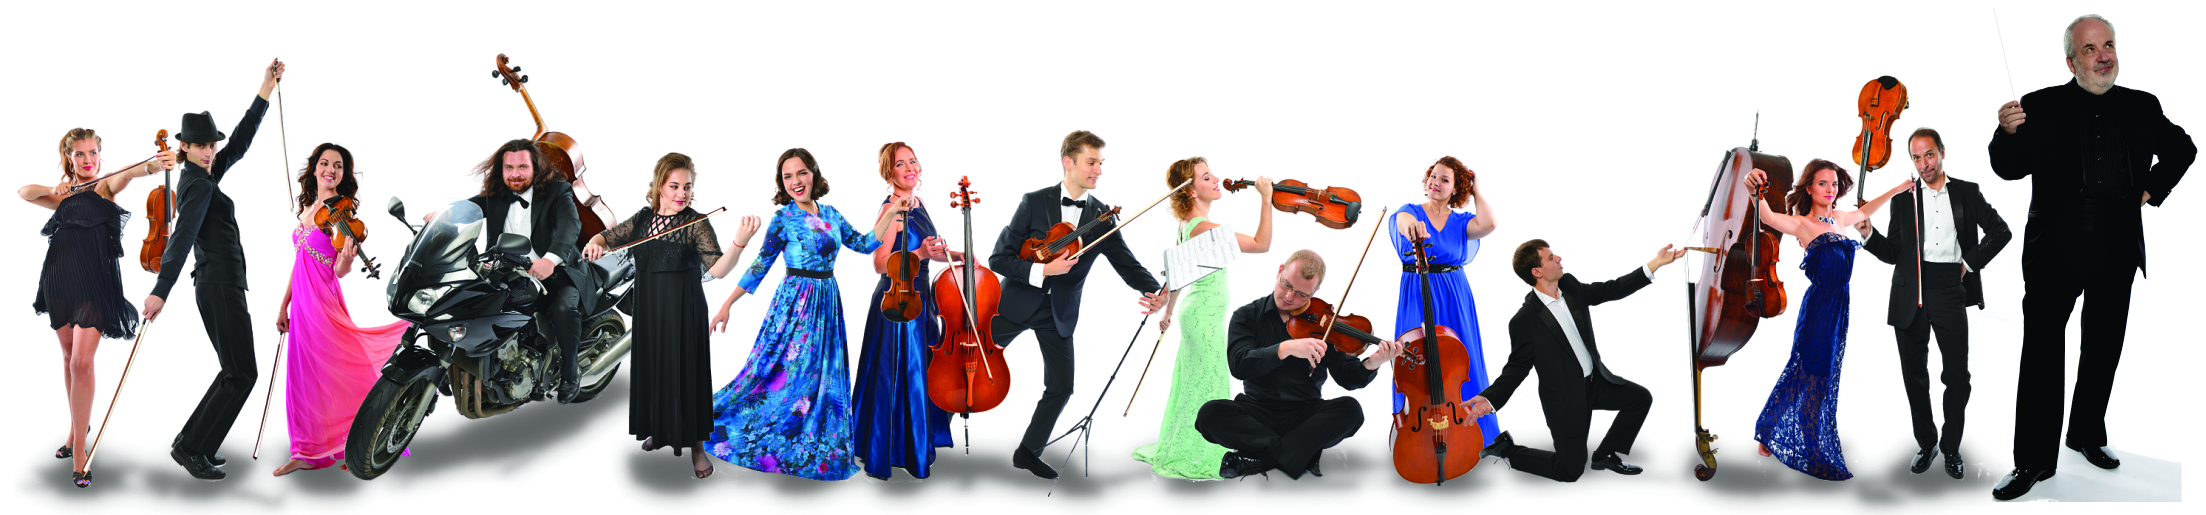 JBU Artist Series Welcomes Russian String Orchestra